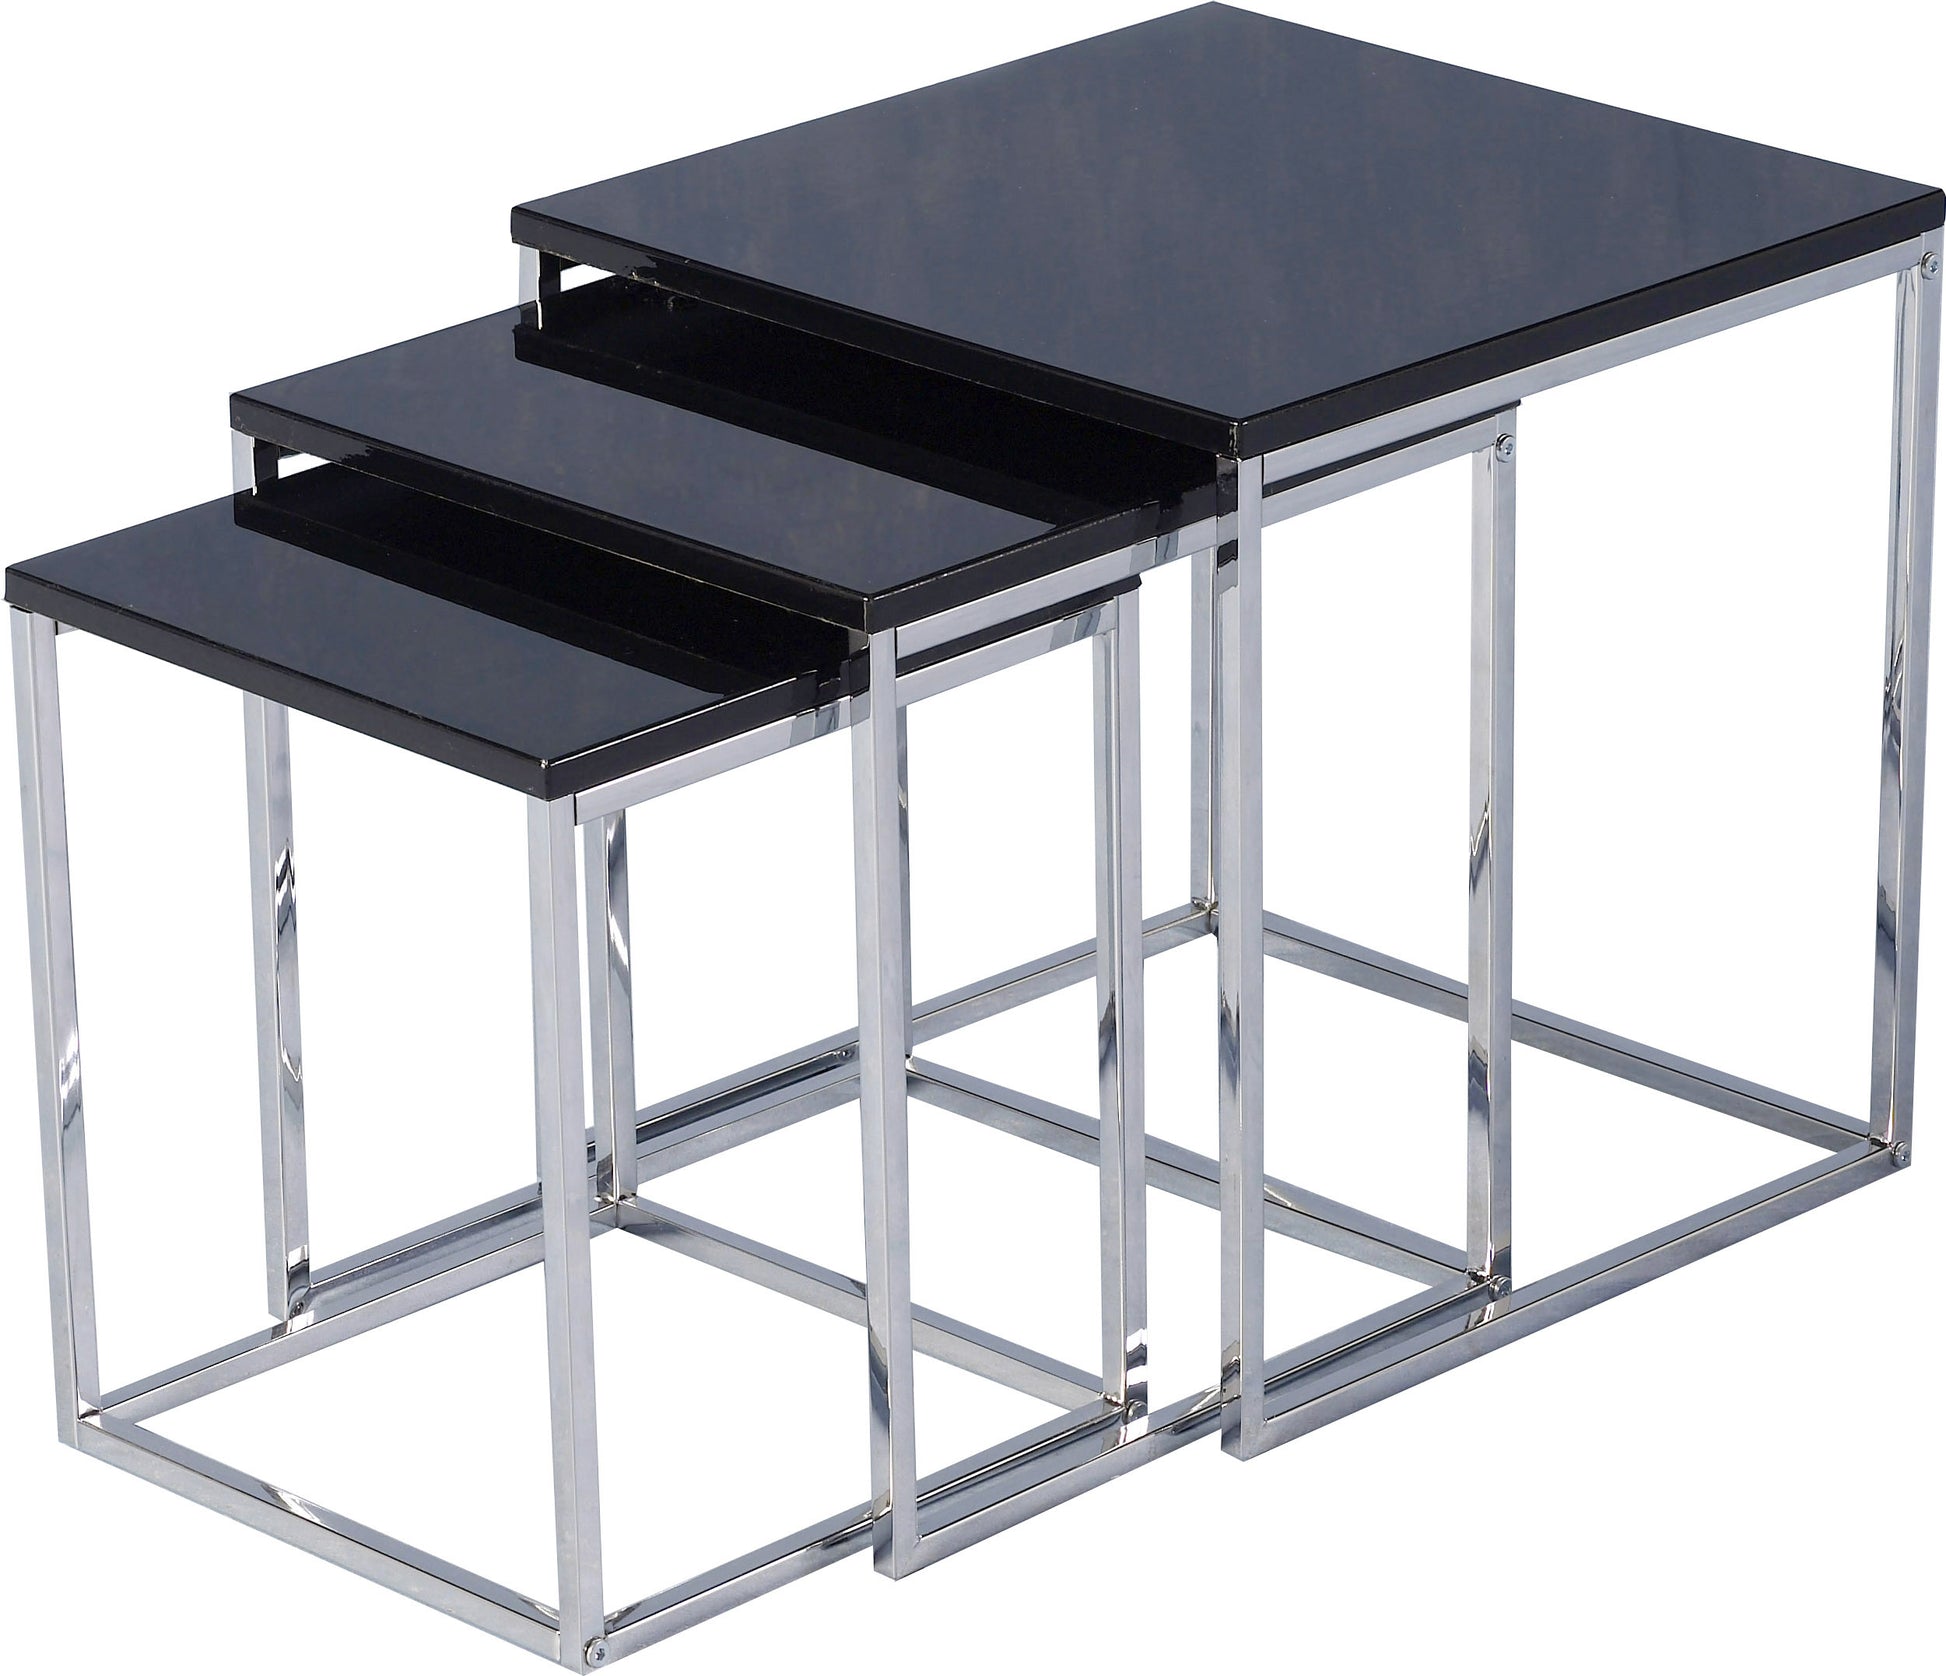 Charisma Nest Of Tables - Black Gloss/Chrome - The Right Buy Store